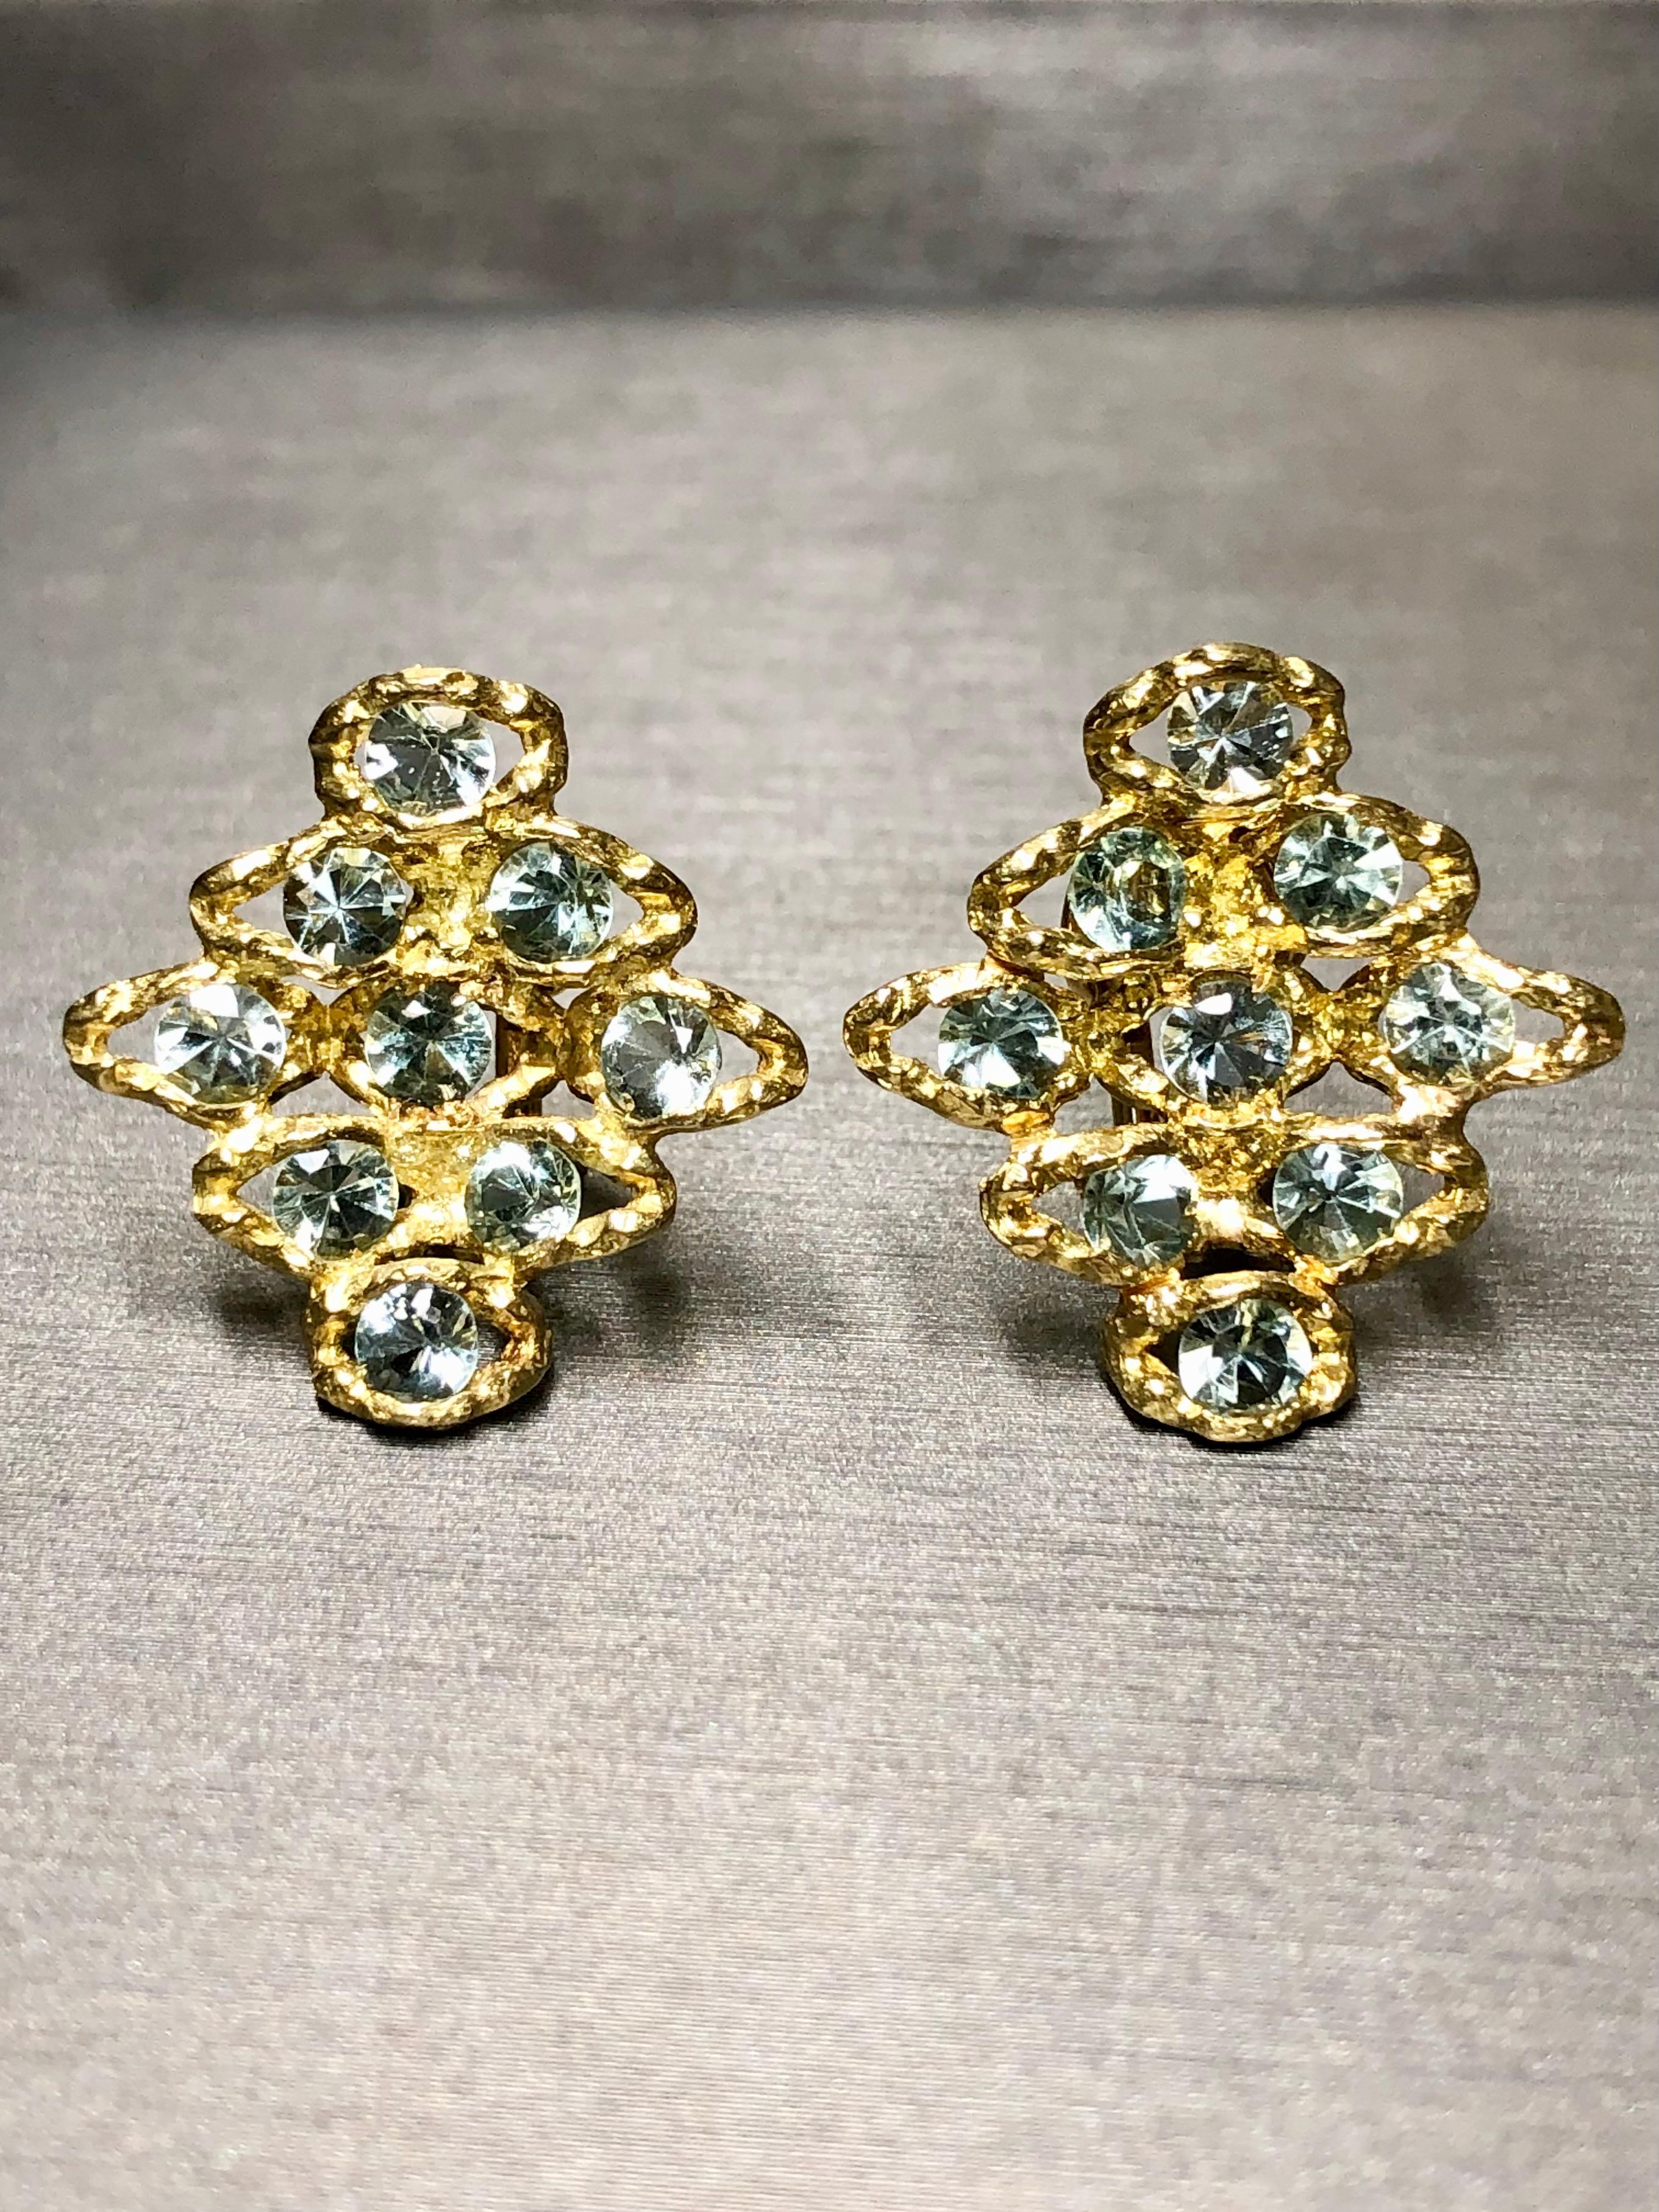 
A beautiful and retired pair of vintage earrings by H. Stern done in 18K textured yellow gold prong set with approximately 5cttw in round cut aquamarines. Earrings are clip-on with omega backs.


Dimensions/Weight:

Earrings measure .95” in